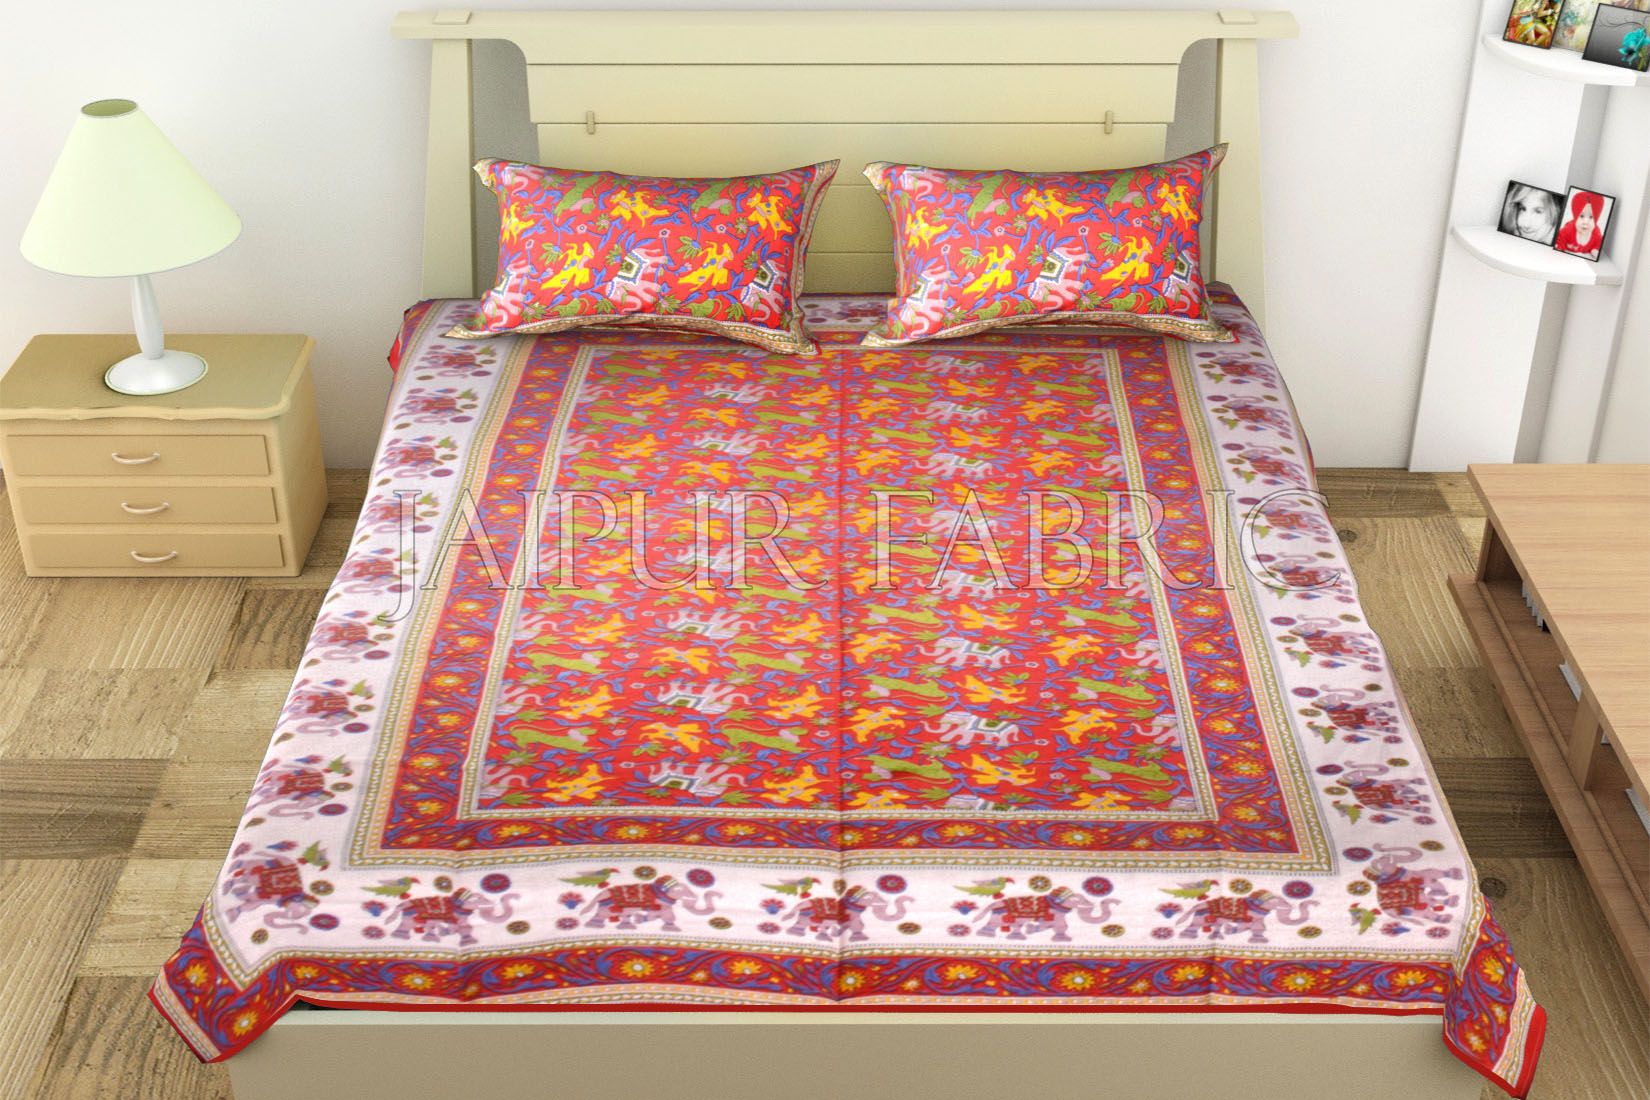 Red Elephant and Tropical Printed Rajasthani Cotton Single Bed Sheet